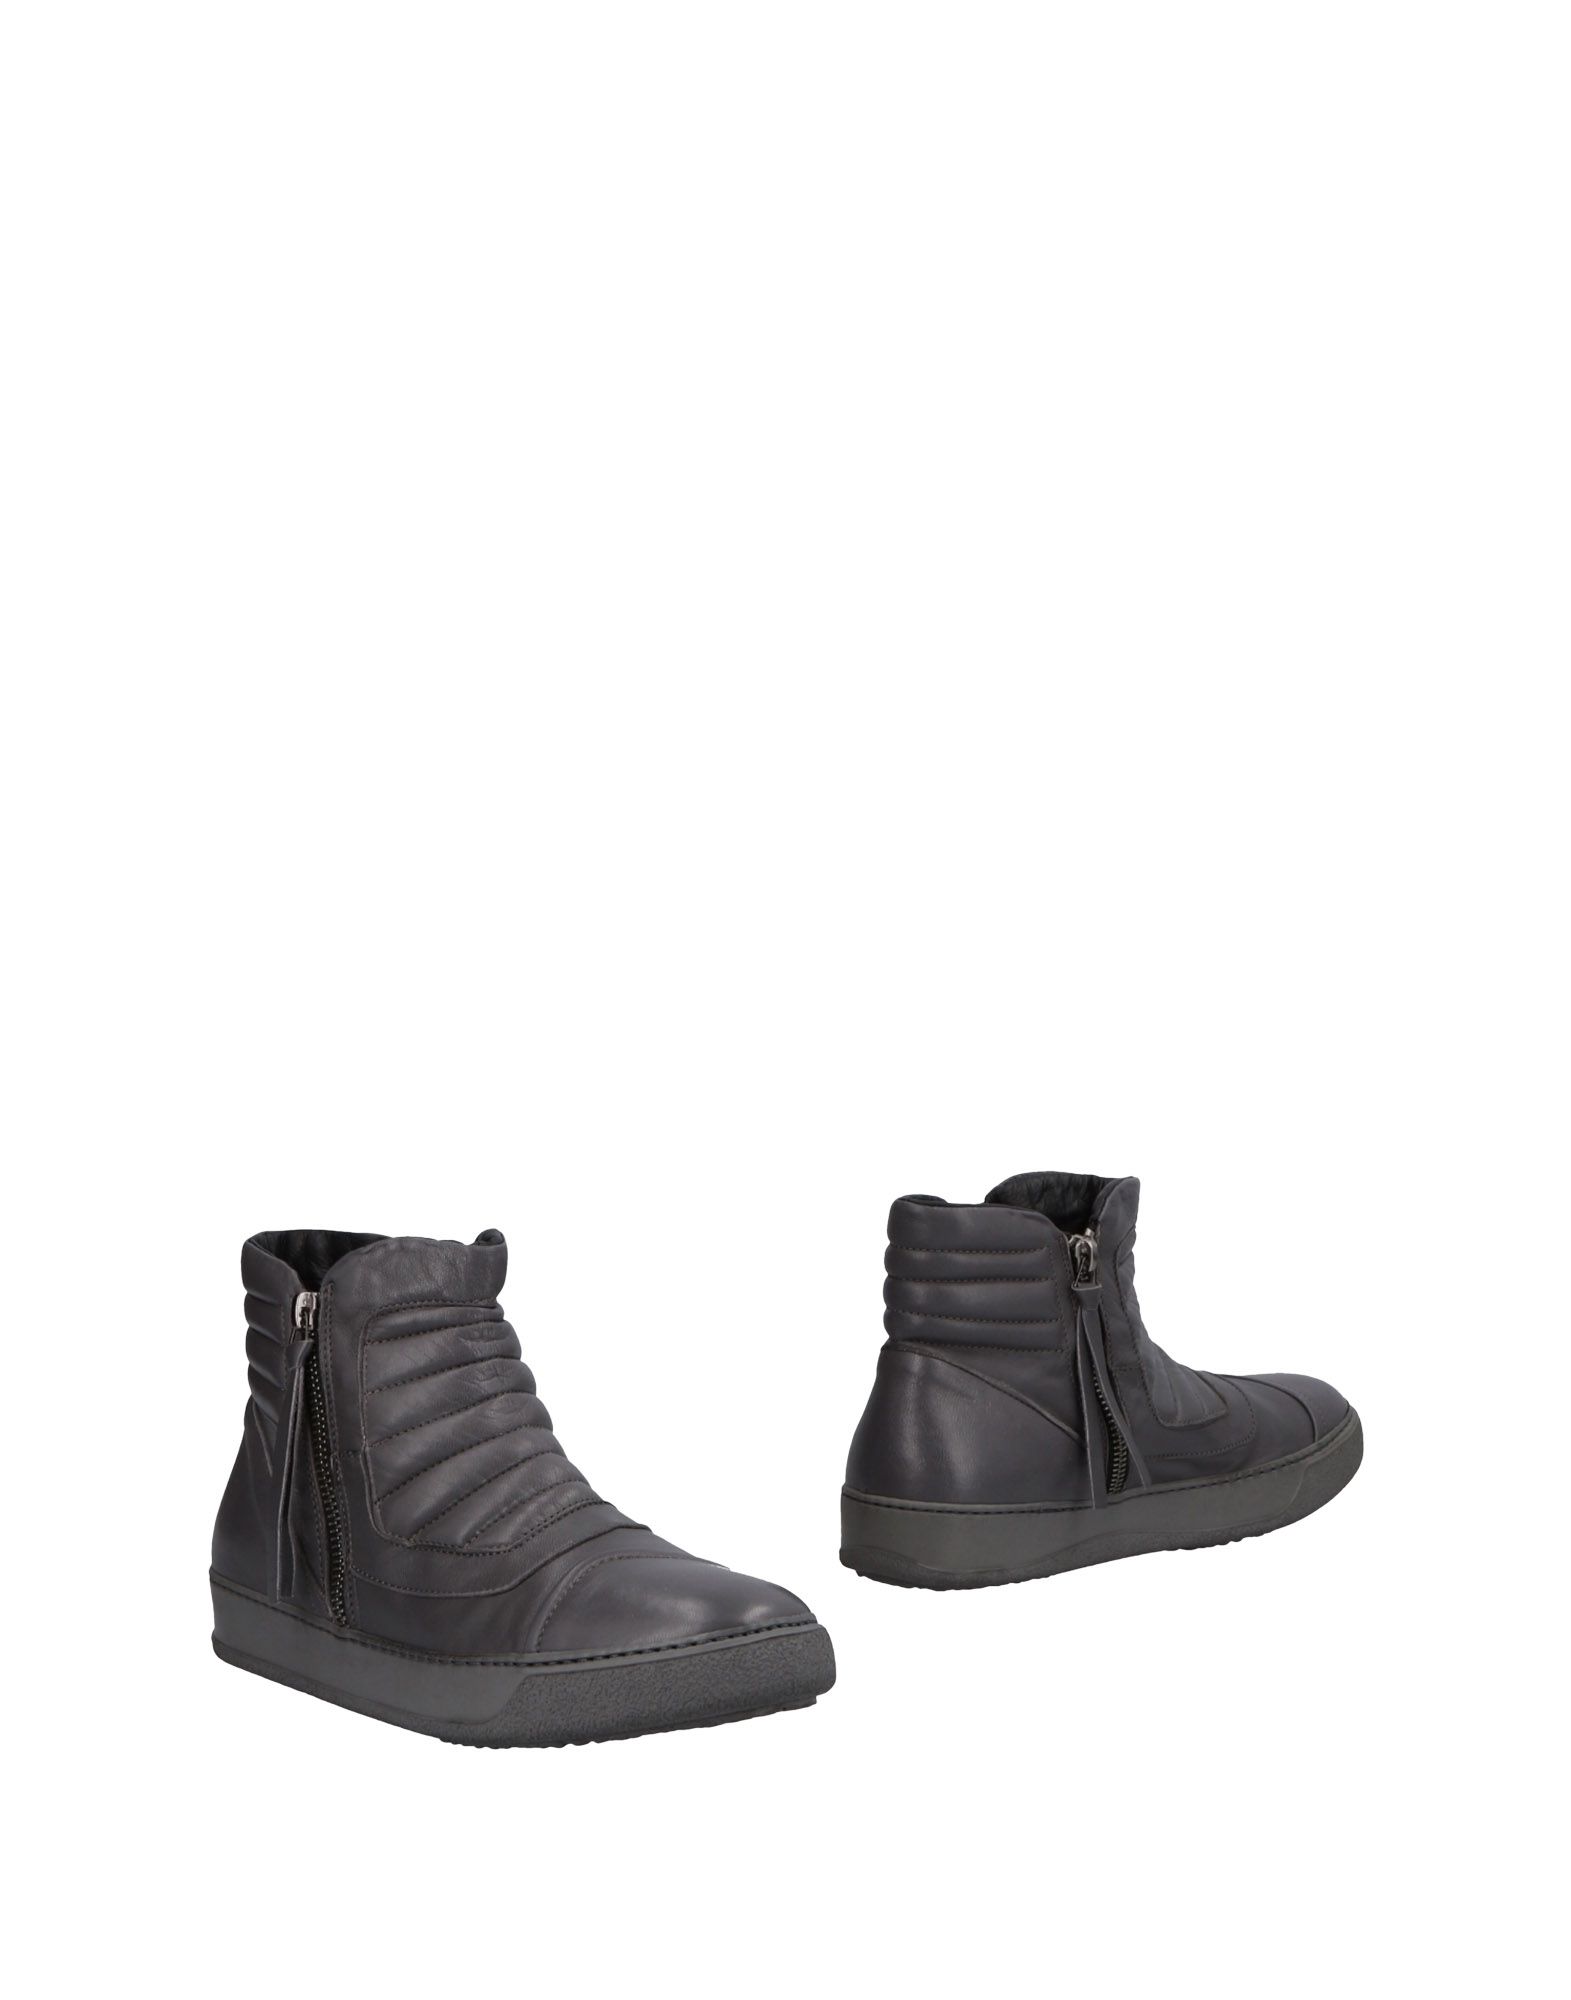 BRUNO BORDESE ANKLE BOOTS,11494261PL 13